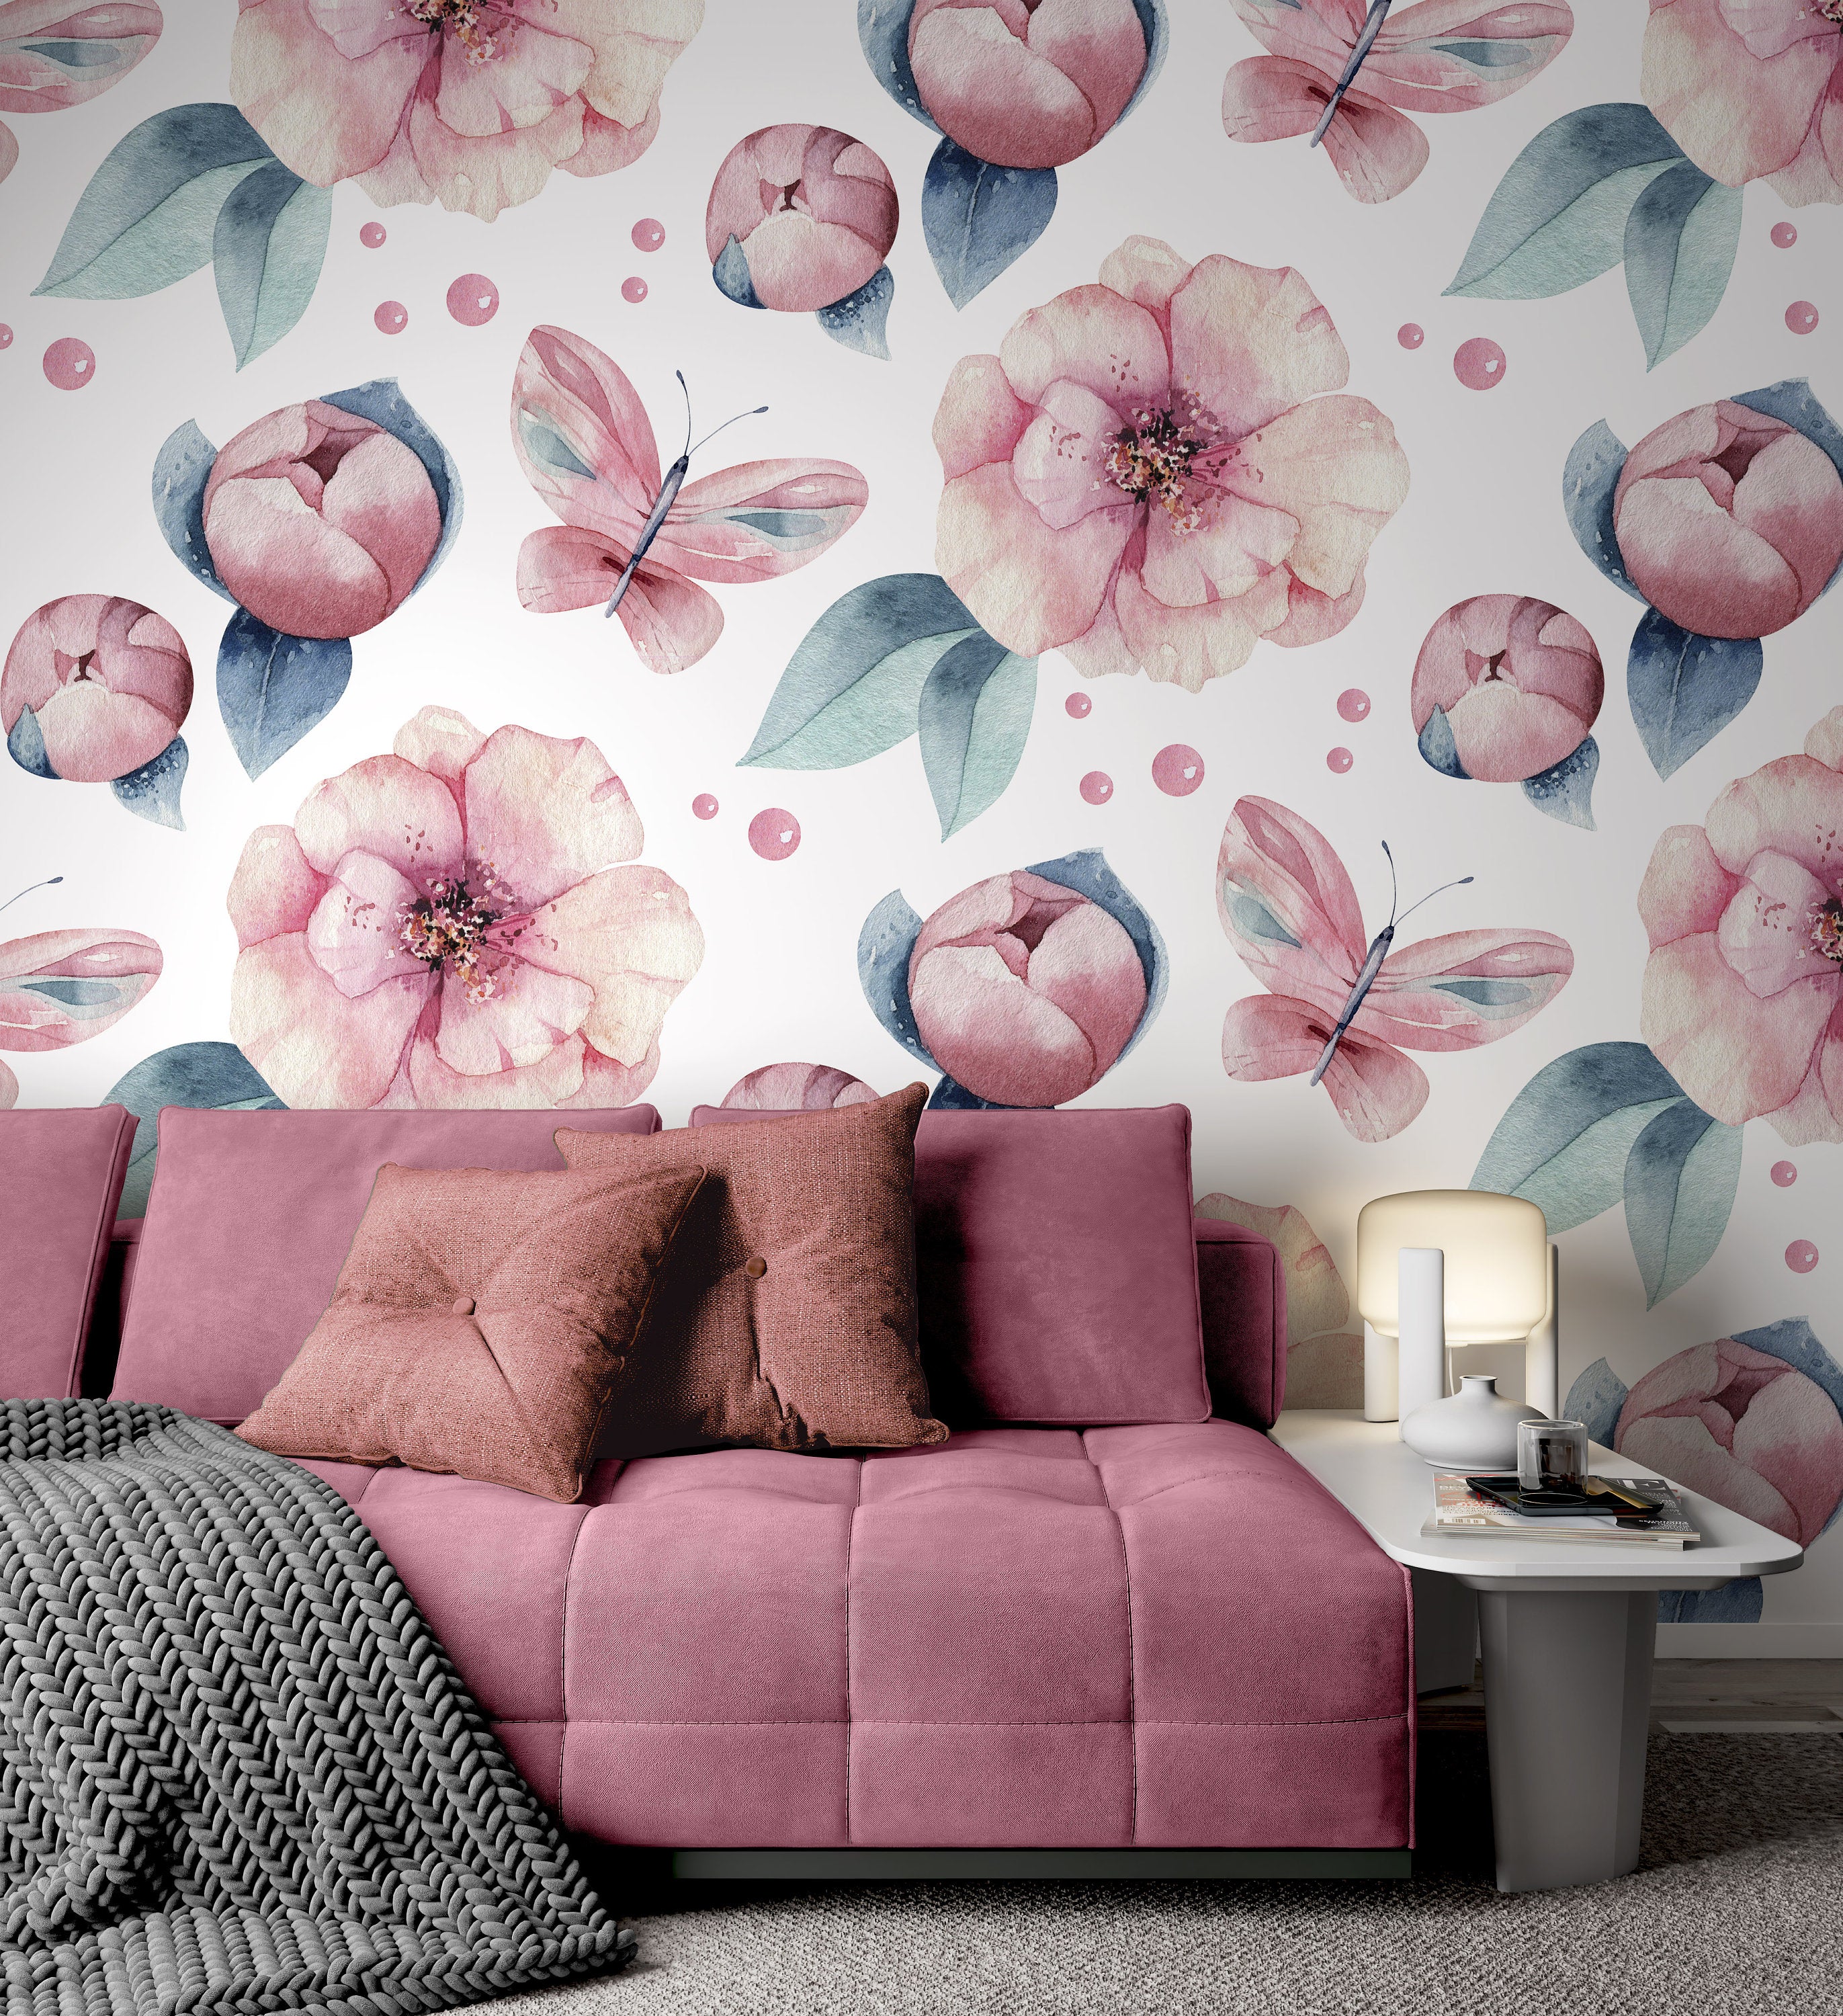 Watercolor Pinkish Flowers Leaves Pink Butterfly Wallpaper Self Adhesive Peel and Stick Home House Wall Decoration Removable